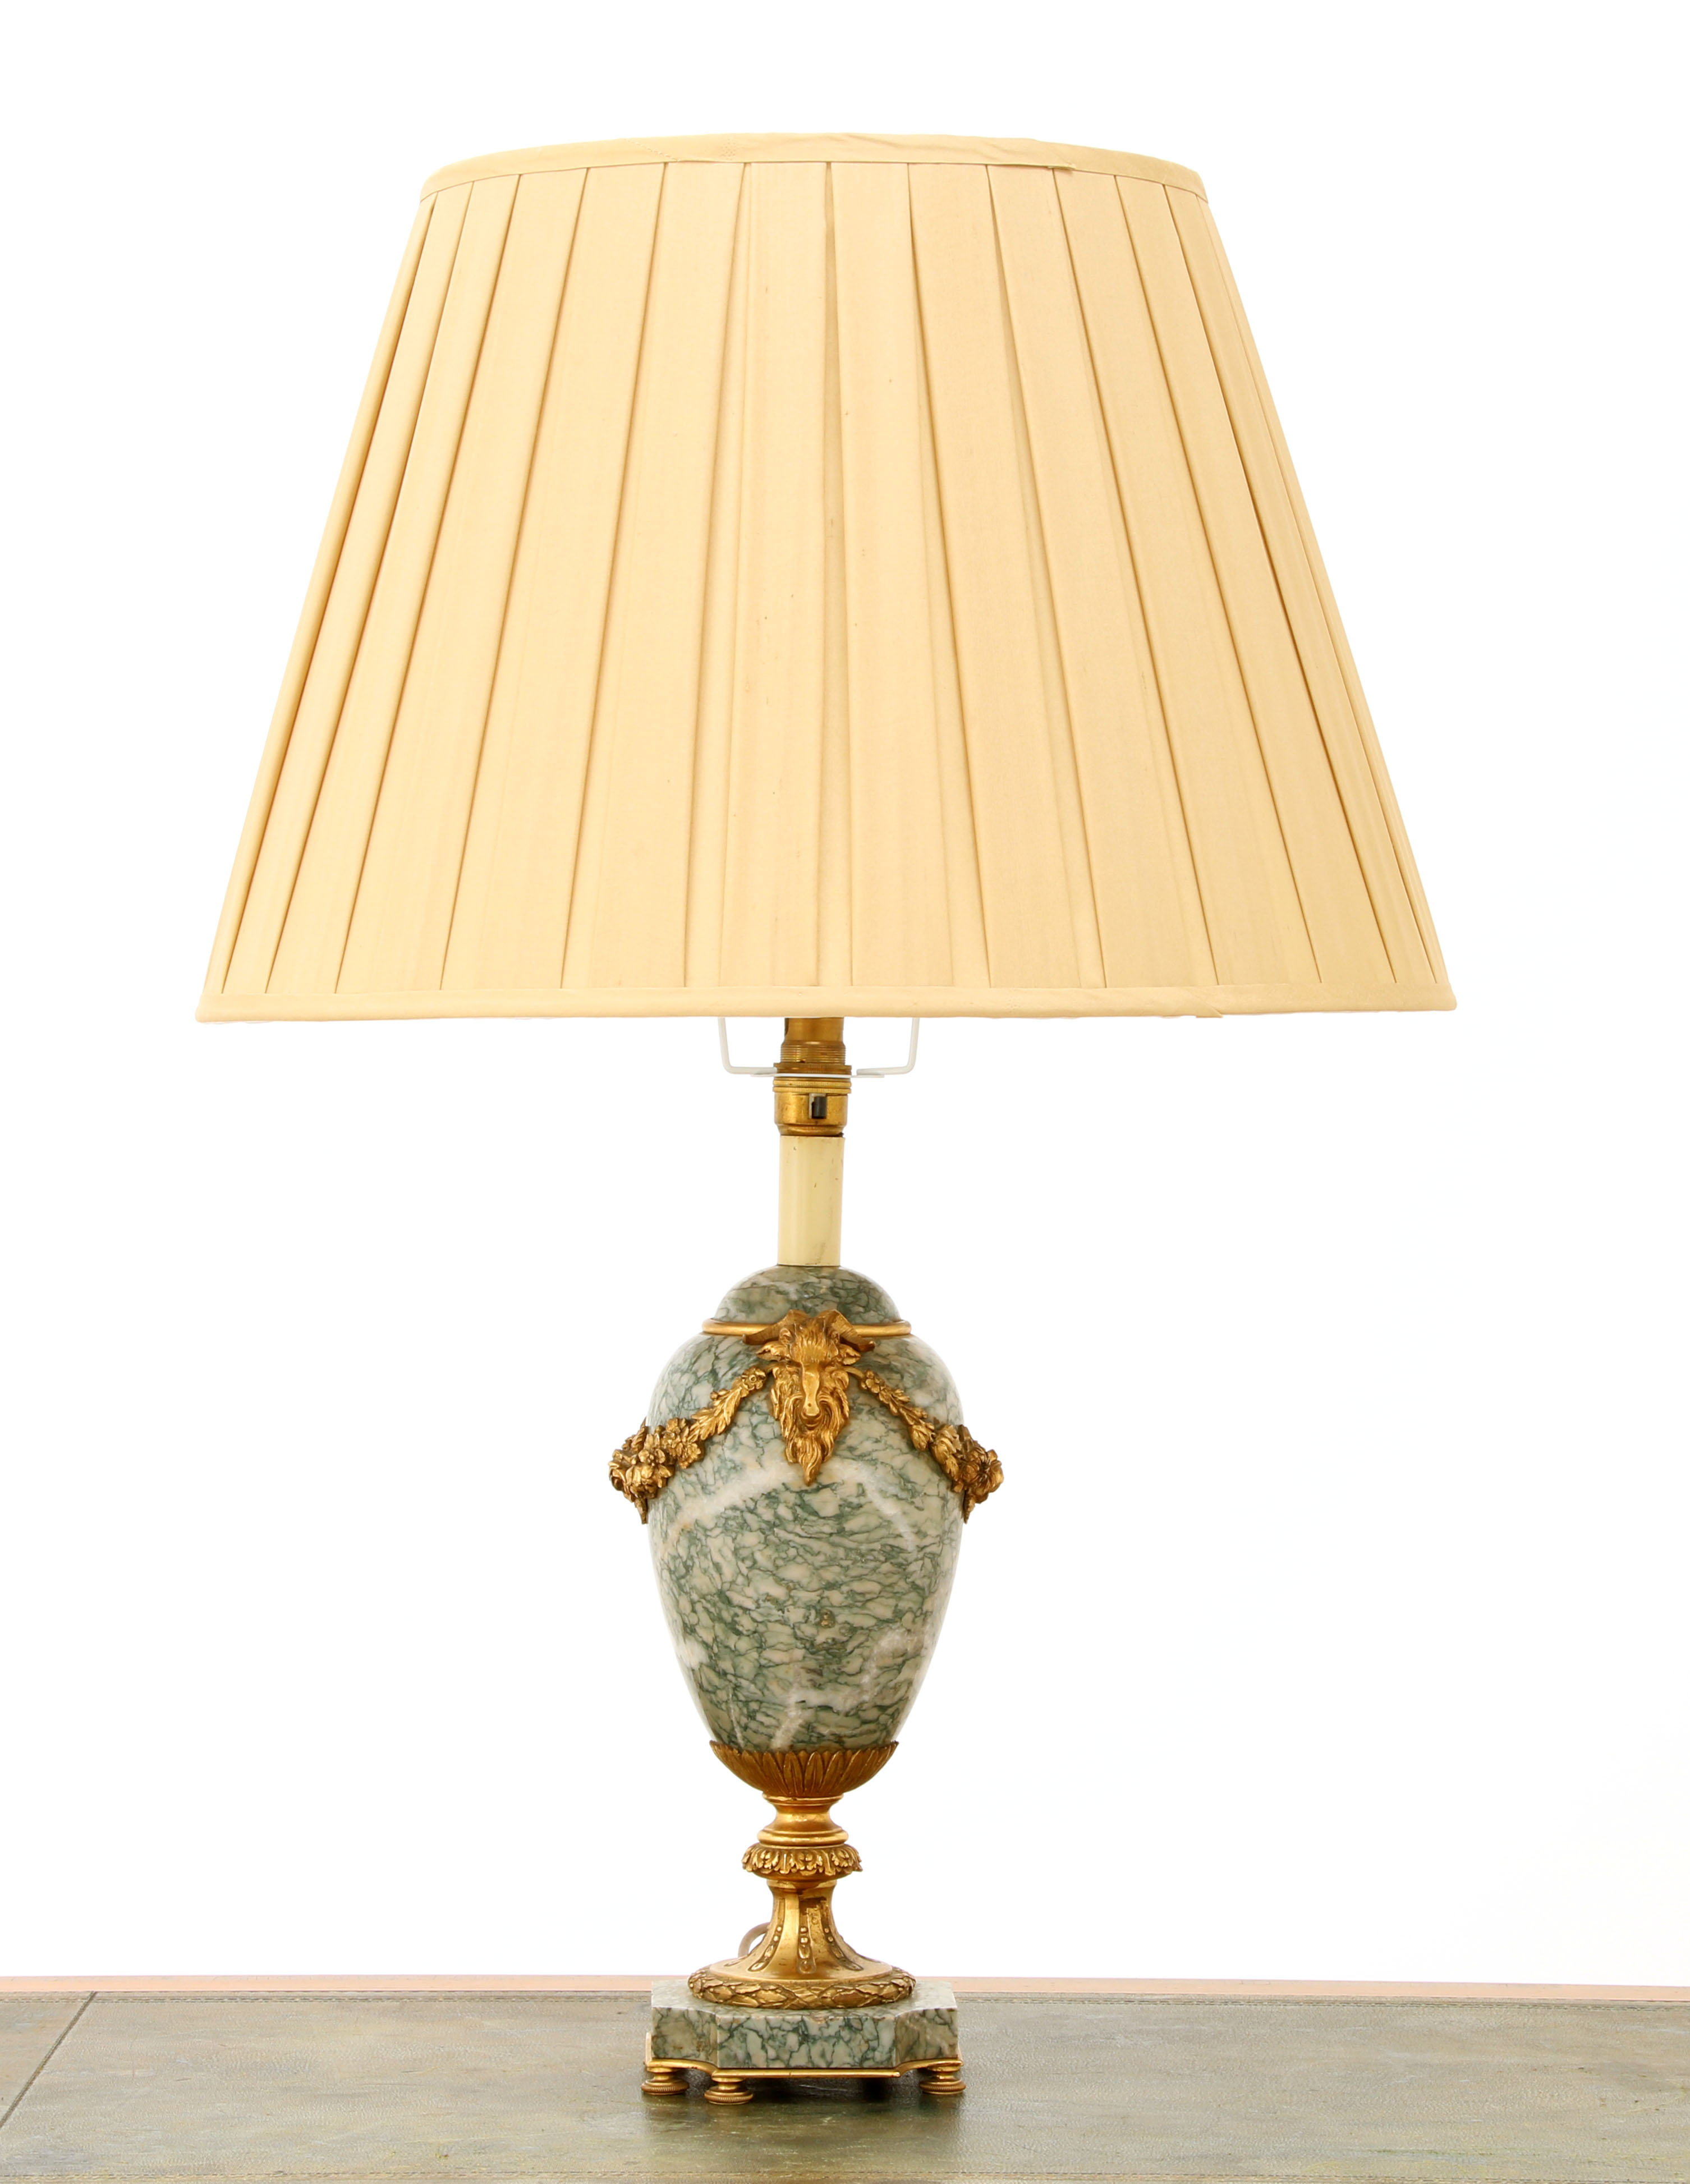 A French green-veined marble table lamp